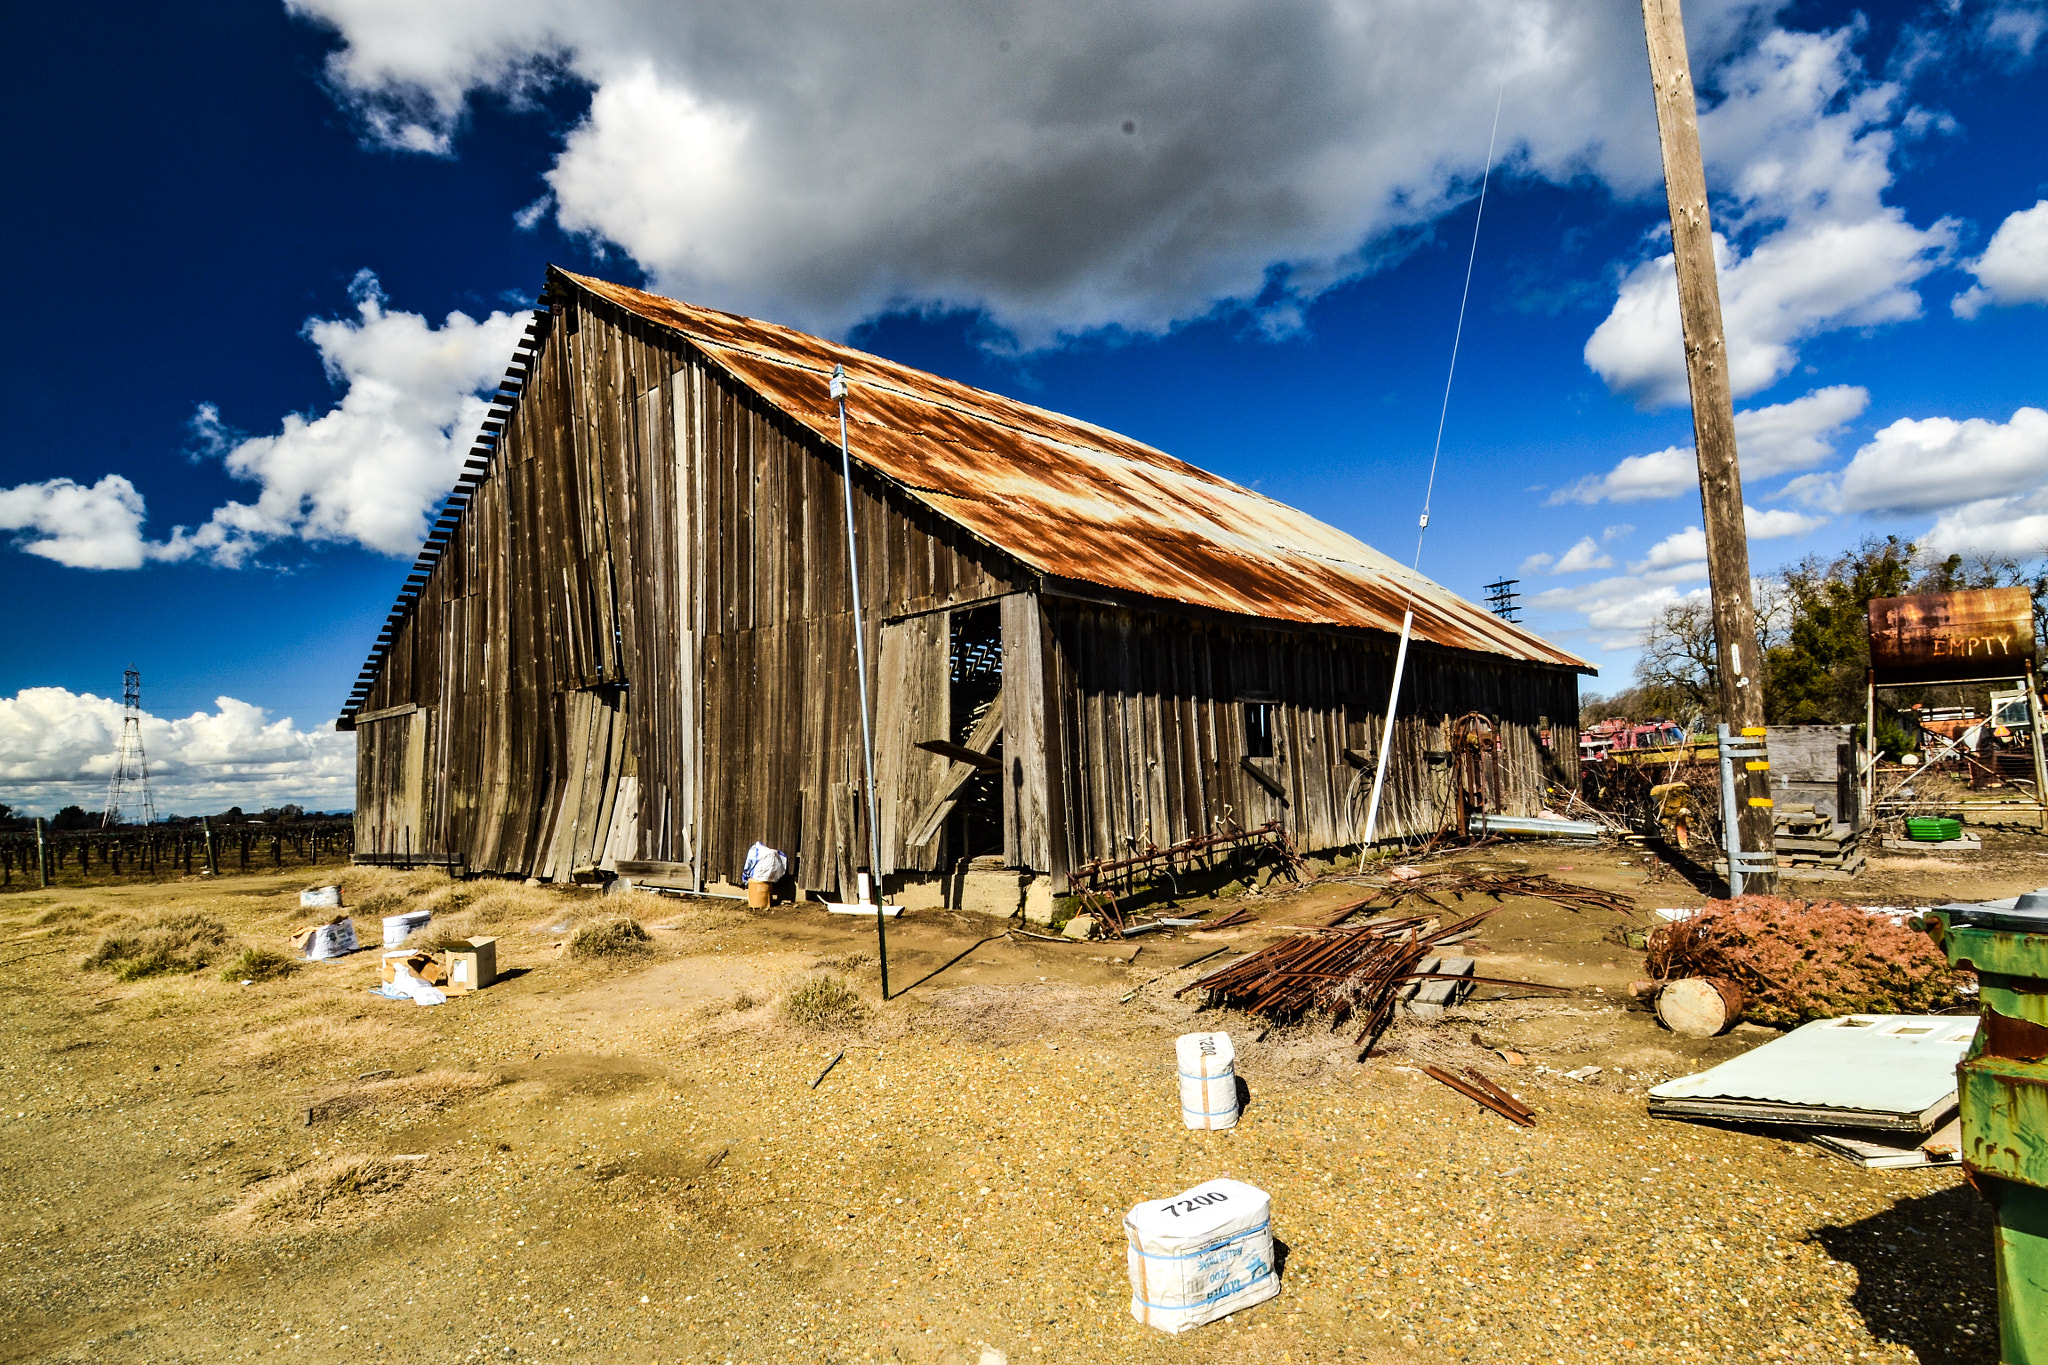 Tamron SP AF 10-24mm F3.5-4.5 Di II LD Aspherical (IF) sample photo. Just an old barn.... but still has allot of character photography